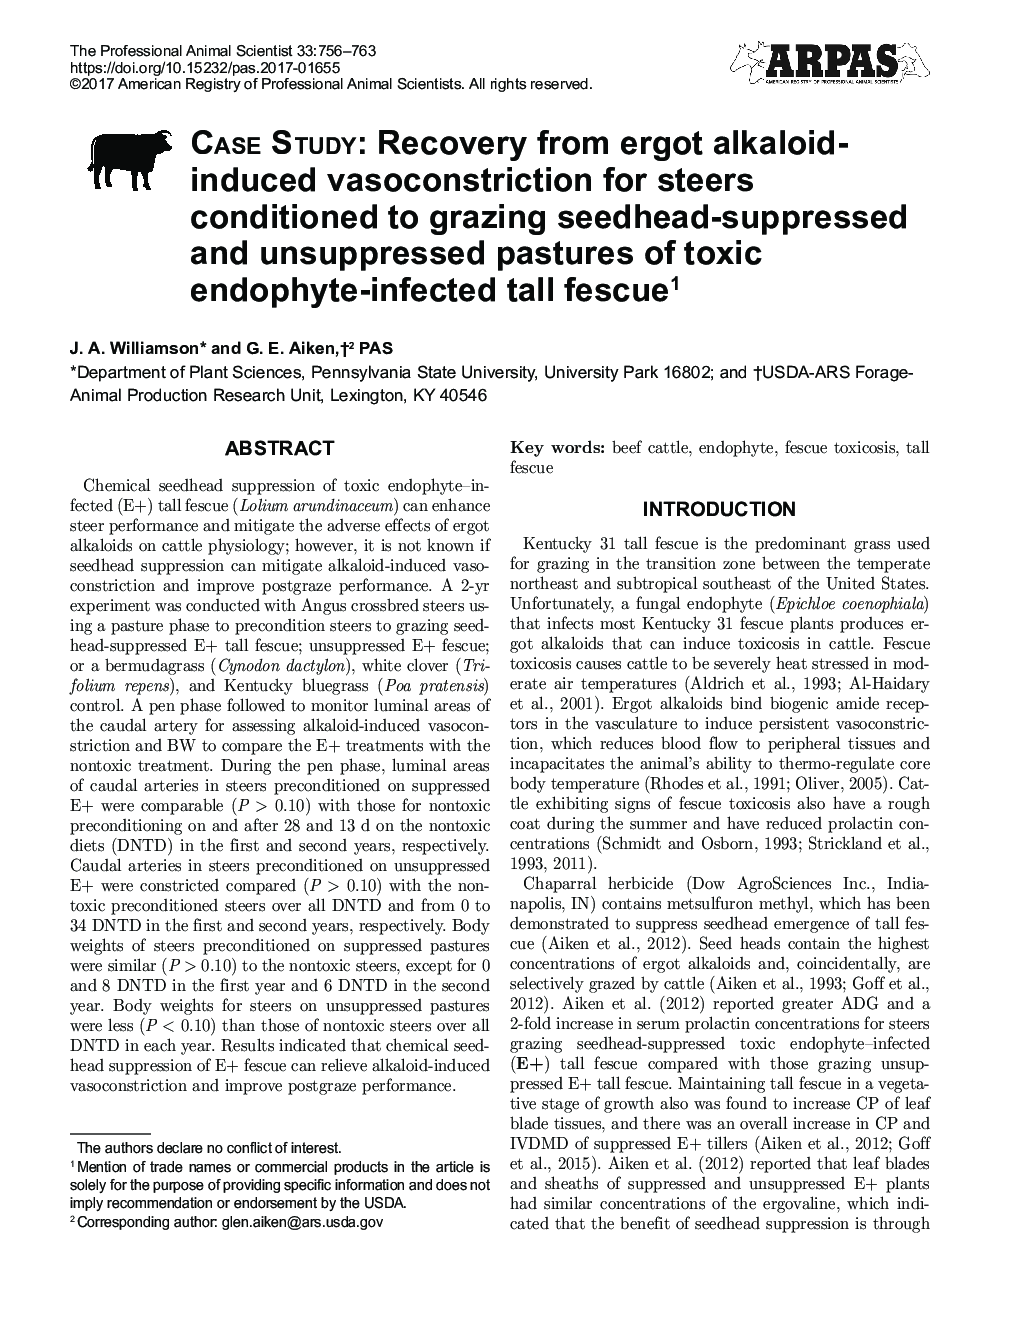 Case Study: Recovery from ergot alkaloid-induced vasoconstriction for steers conditioned to grazing seedhead-suppressed and unsuppressed pastures of toxic endophyte-infected tall fescue1